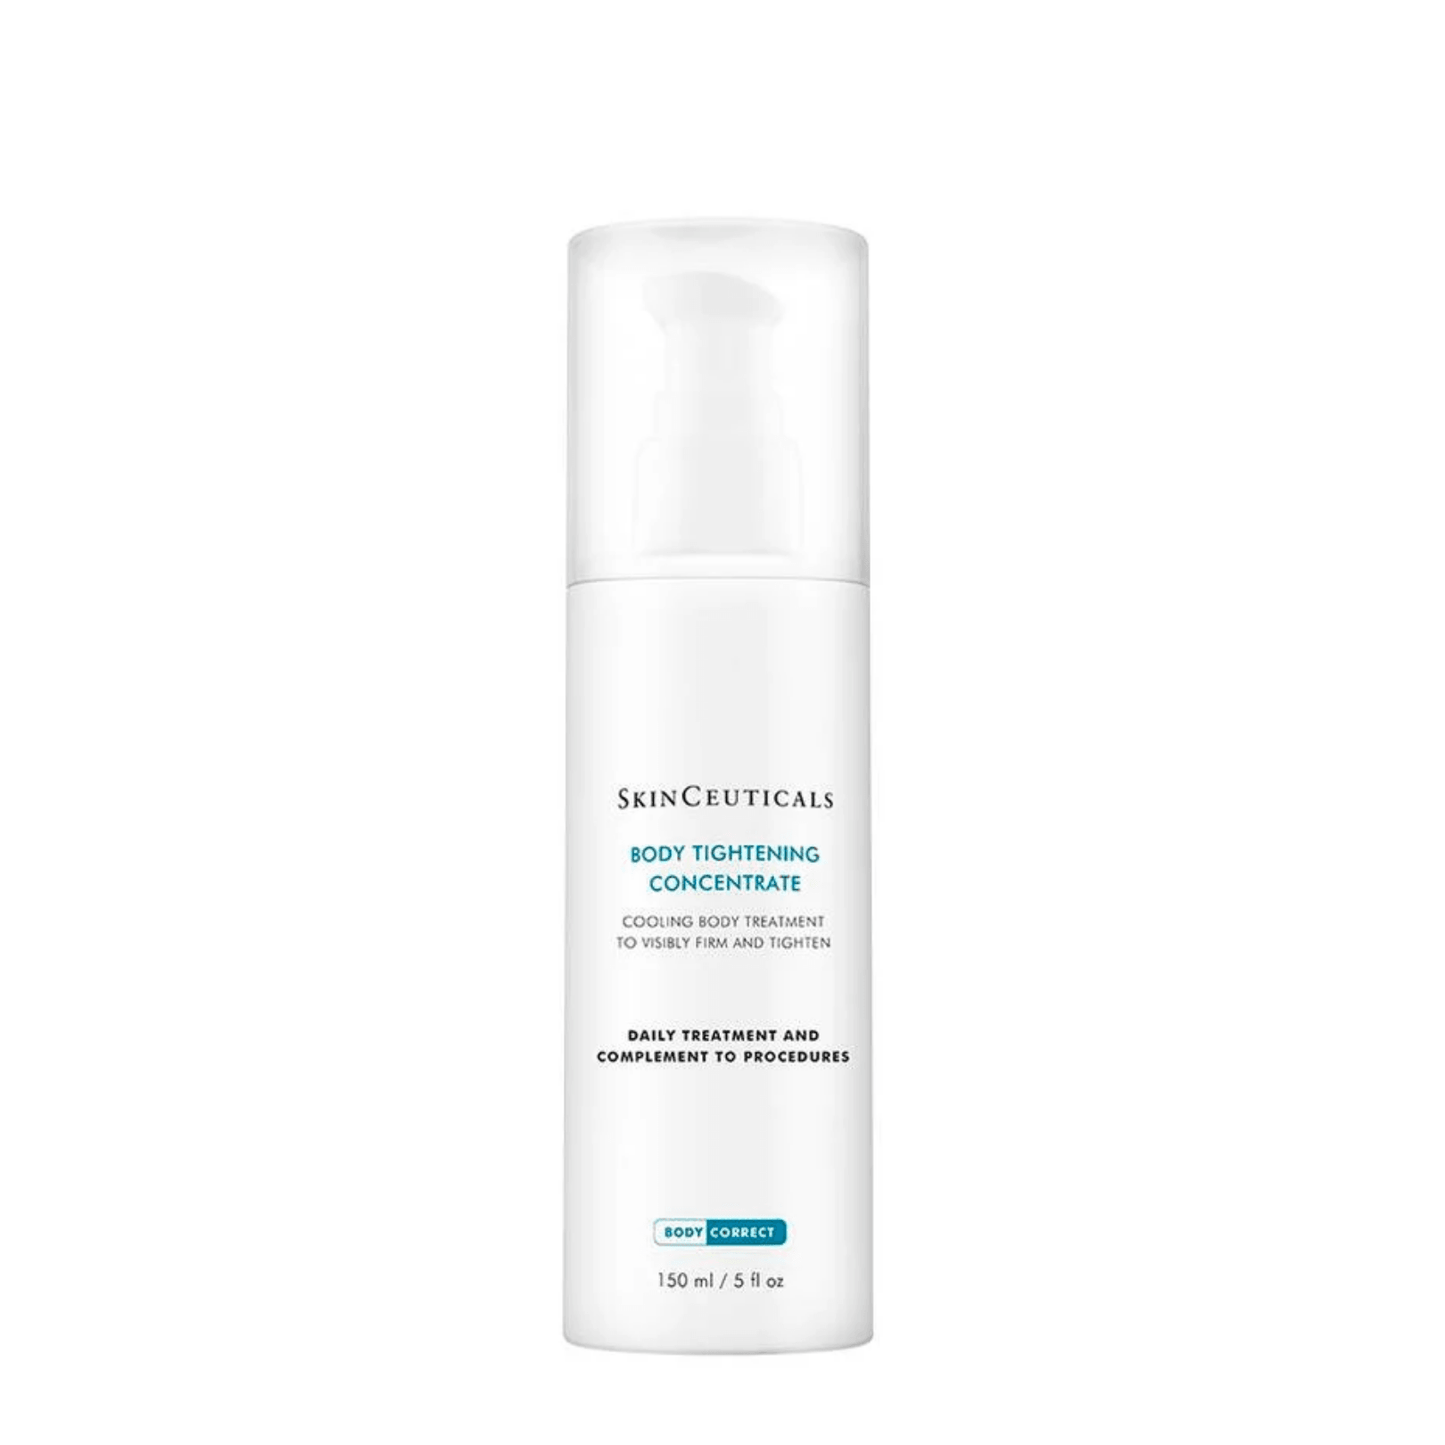 SkinCeuticals Body Tightening Concentrate - Geria Dermatology